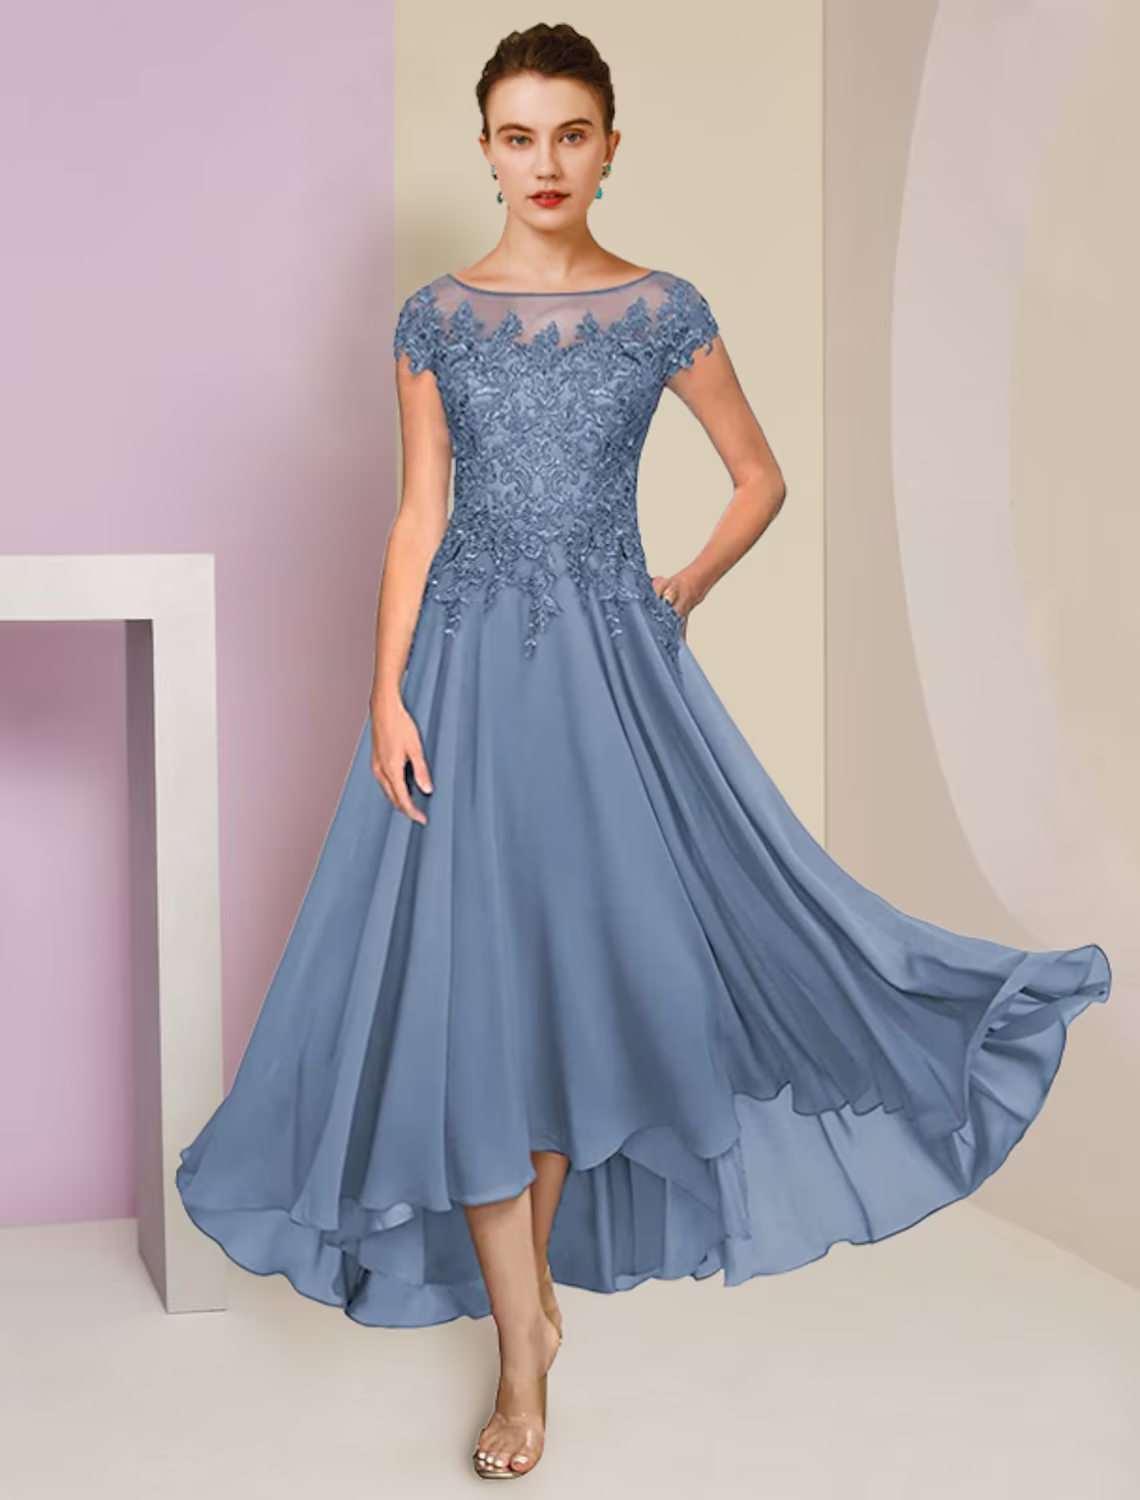 Two Piece A-Line Mother of the Bride Dress Formal Wedding Guest Elegant High Low Scoop Neck Asymmetrical Chiffon Lace Short Sleeve Wrap Included with Sequin Appliques